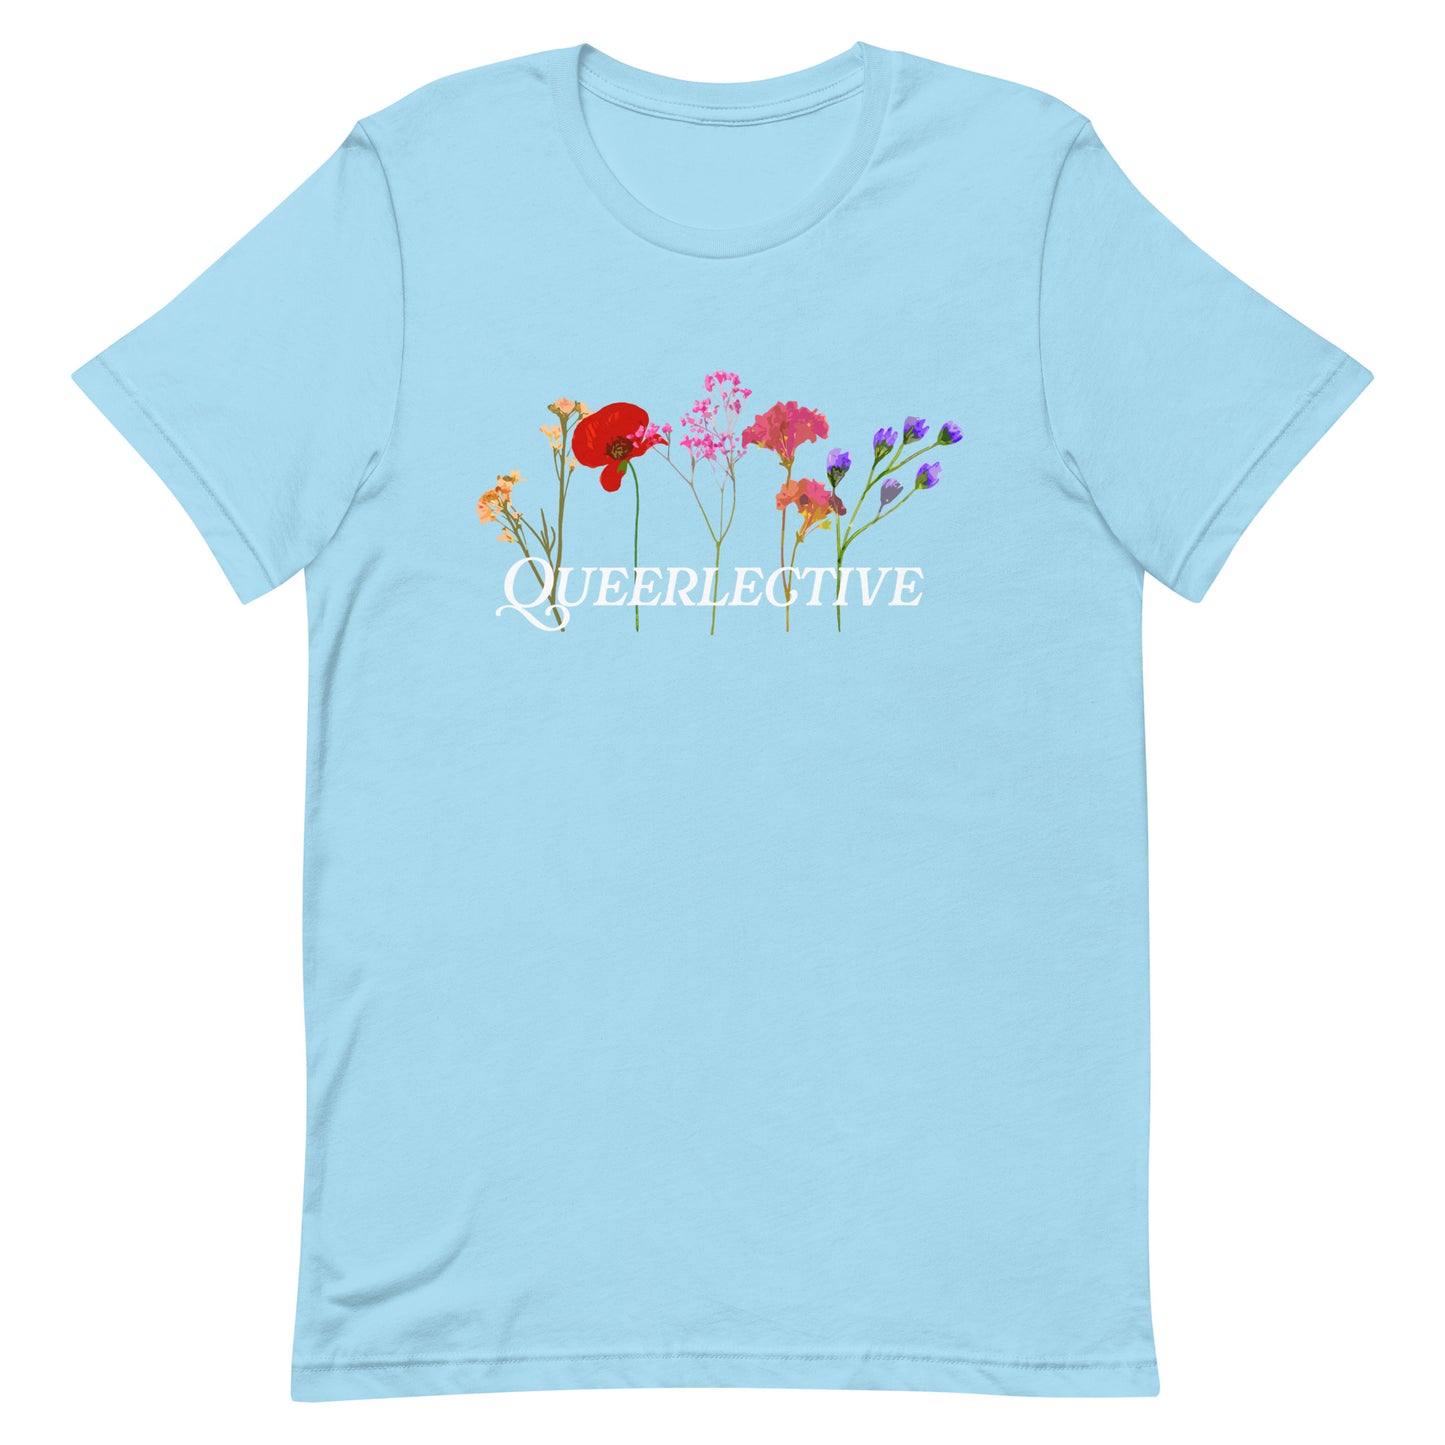 Queerlective Dried Flowers Unisex t-shirt